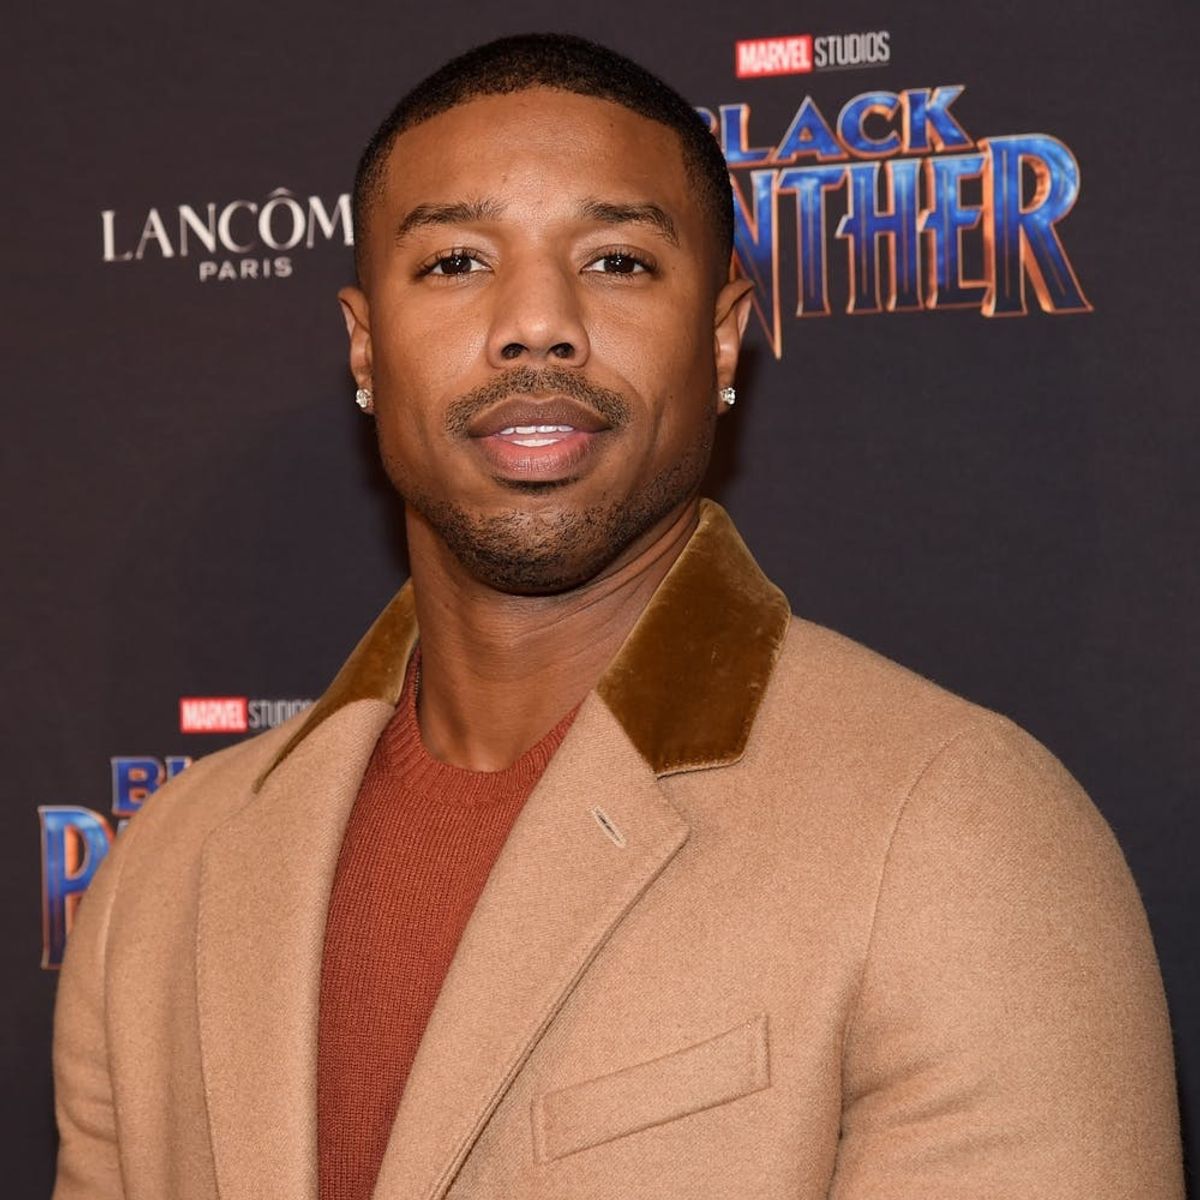 Michael B. Jordan Commits to Using the Inclusion Rider After Frances McDormand’s Oscars Speech